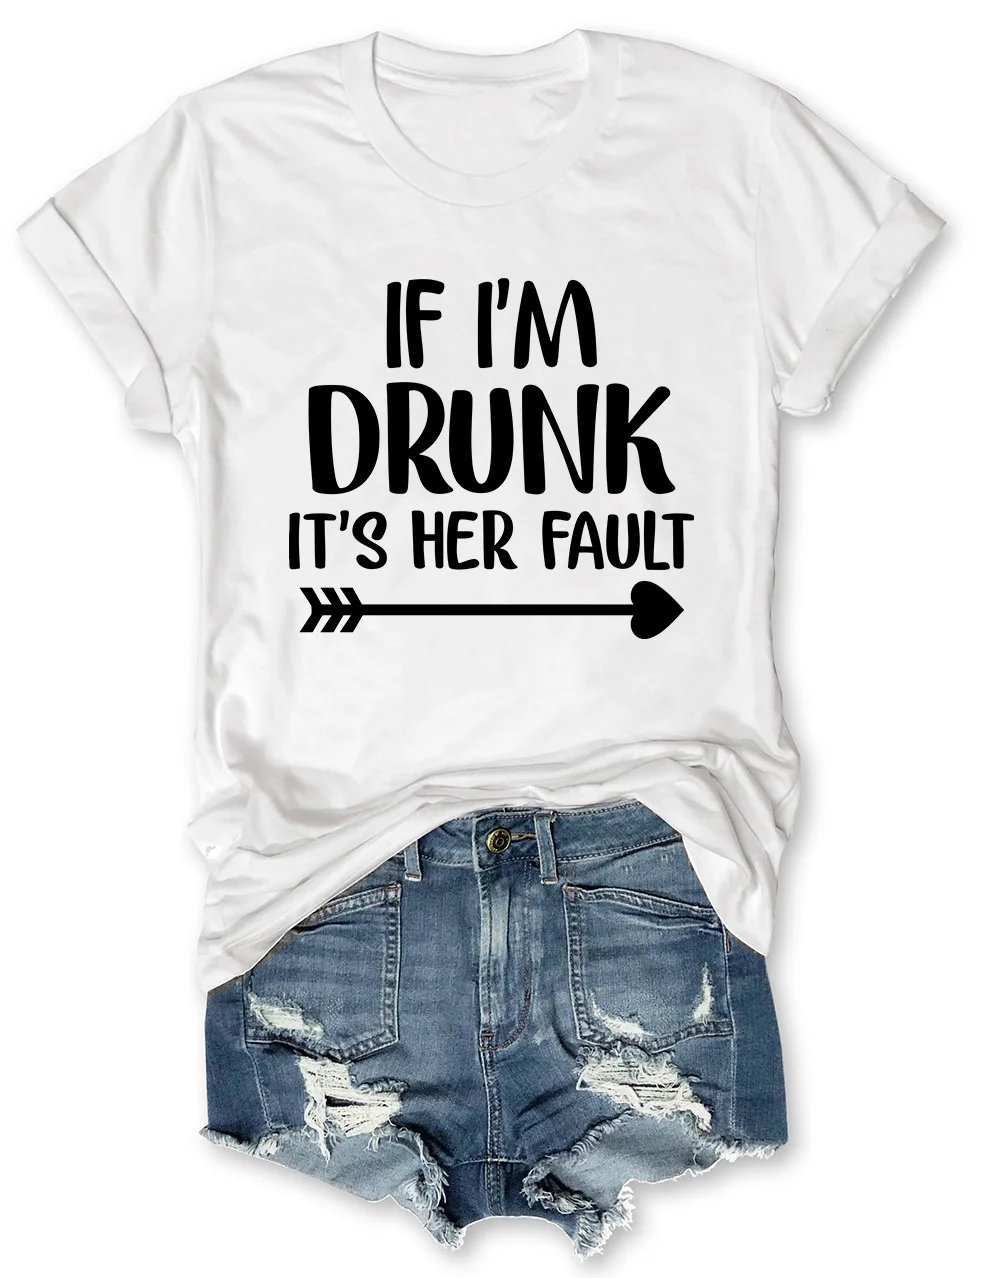 If I'm Drunk It's Her Fault T-Shirt